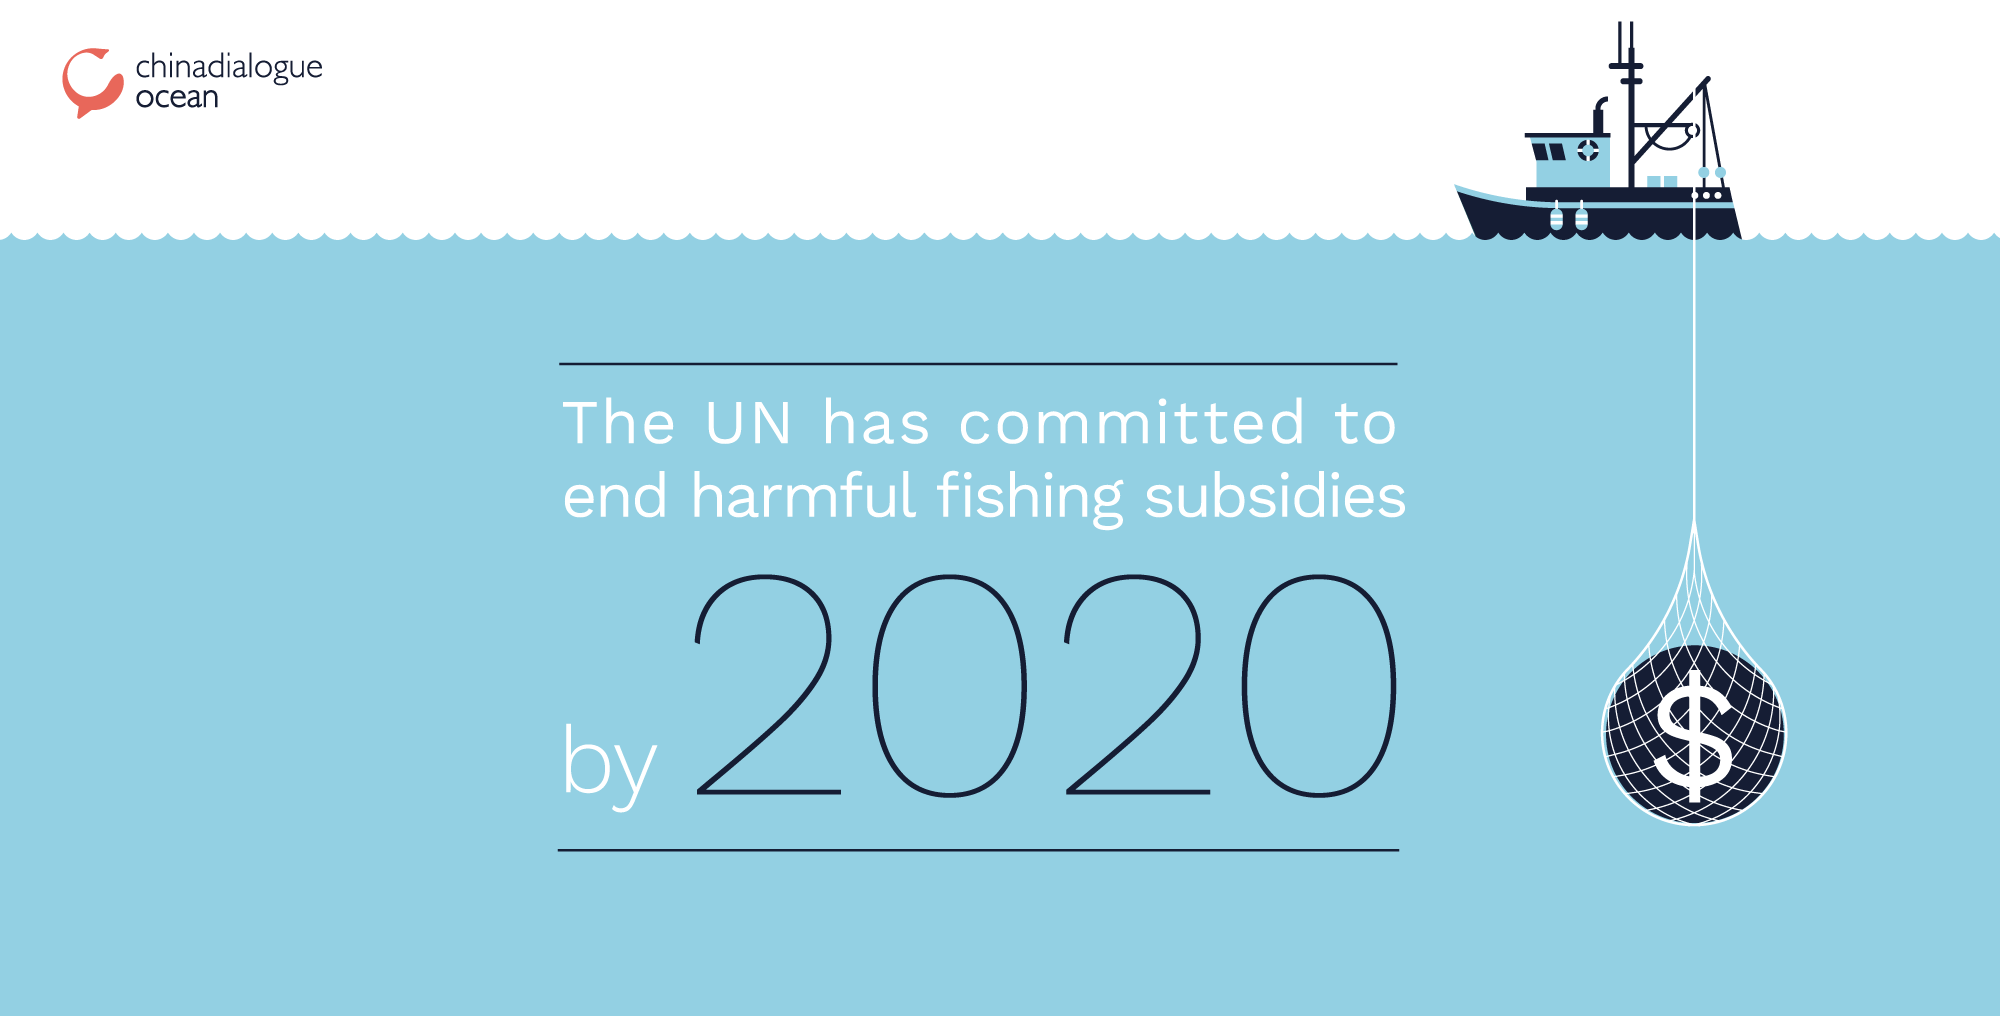 UN commitment to ending harmful fishing subsidies